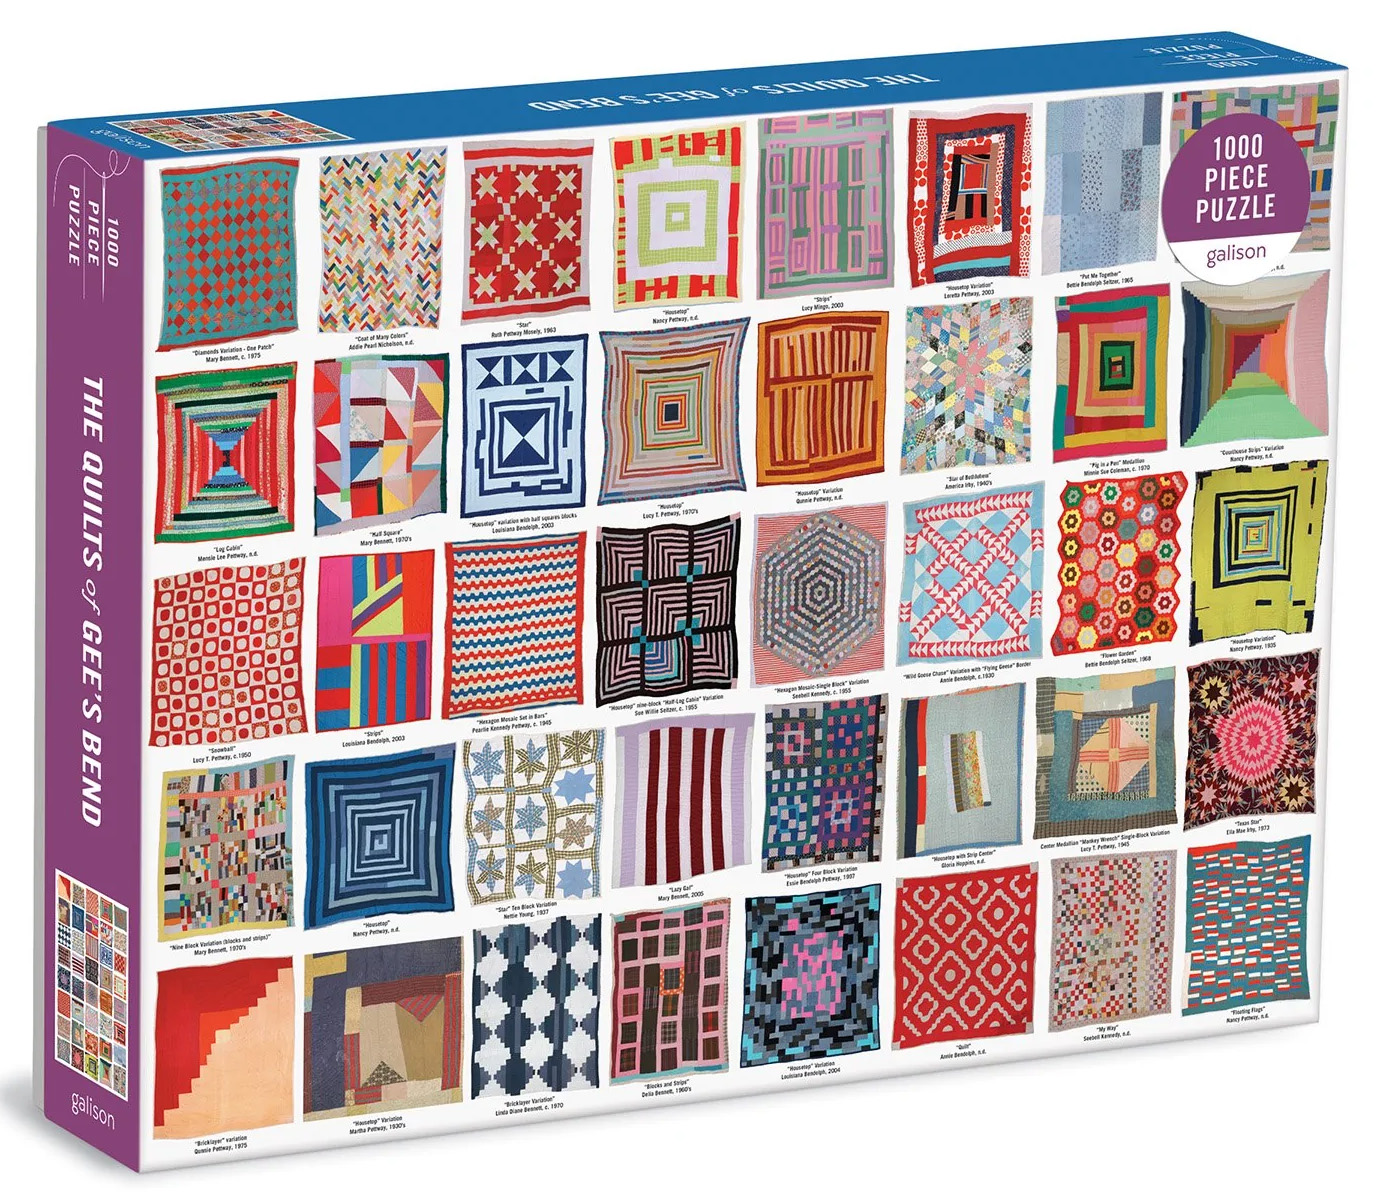 Quilts of Gee's Bend